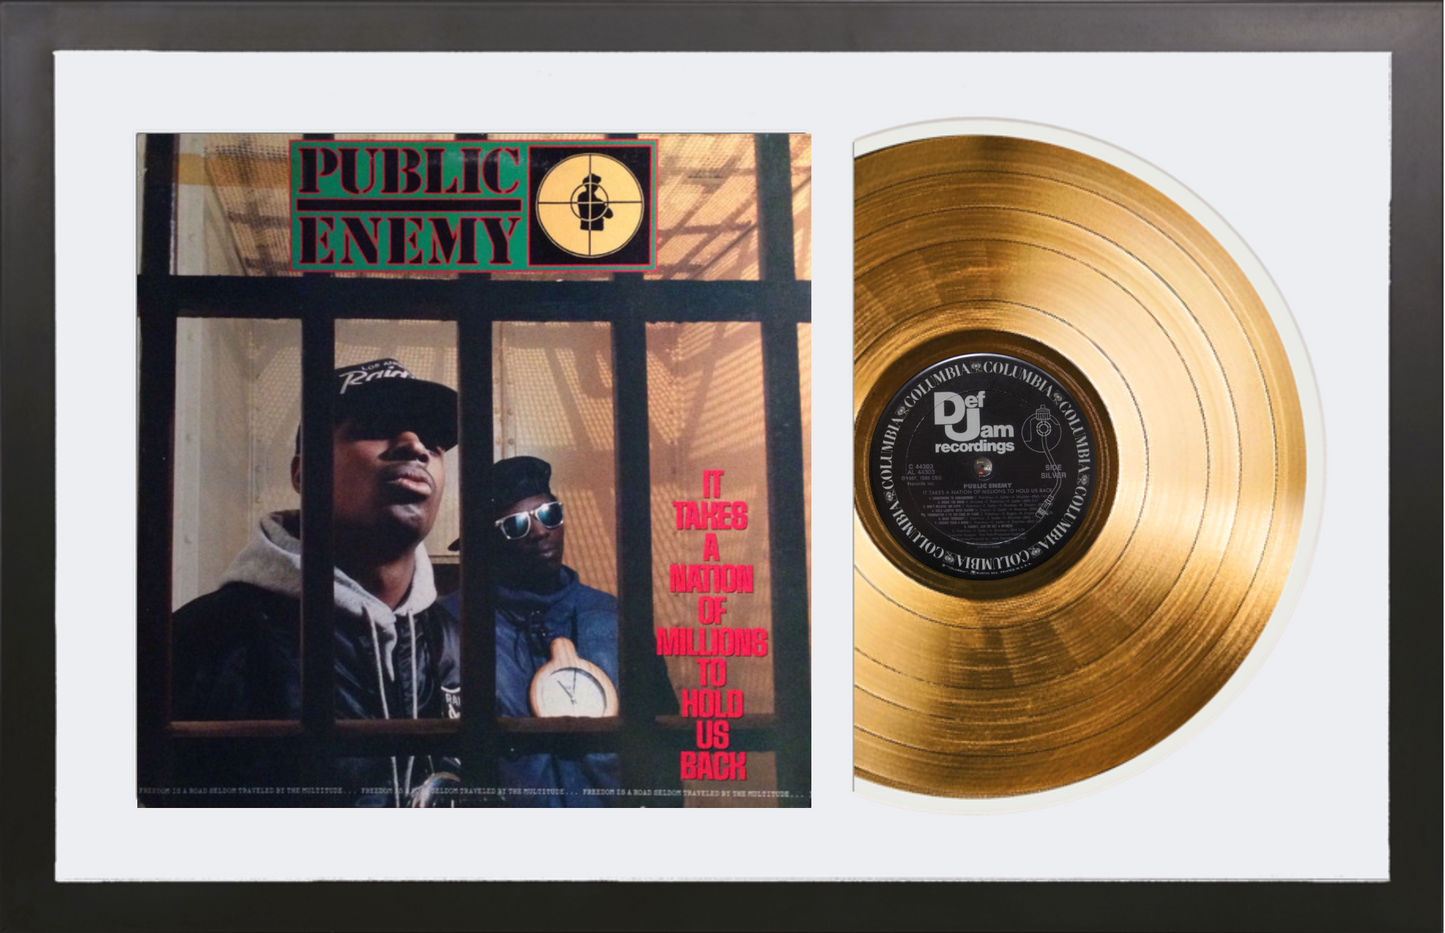 Public Enemy - It Takes a Nation of Millions To Hold Us Back - 14K Gold Framed Album